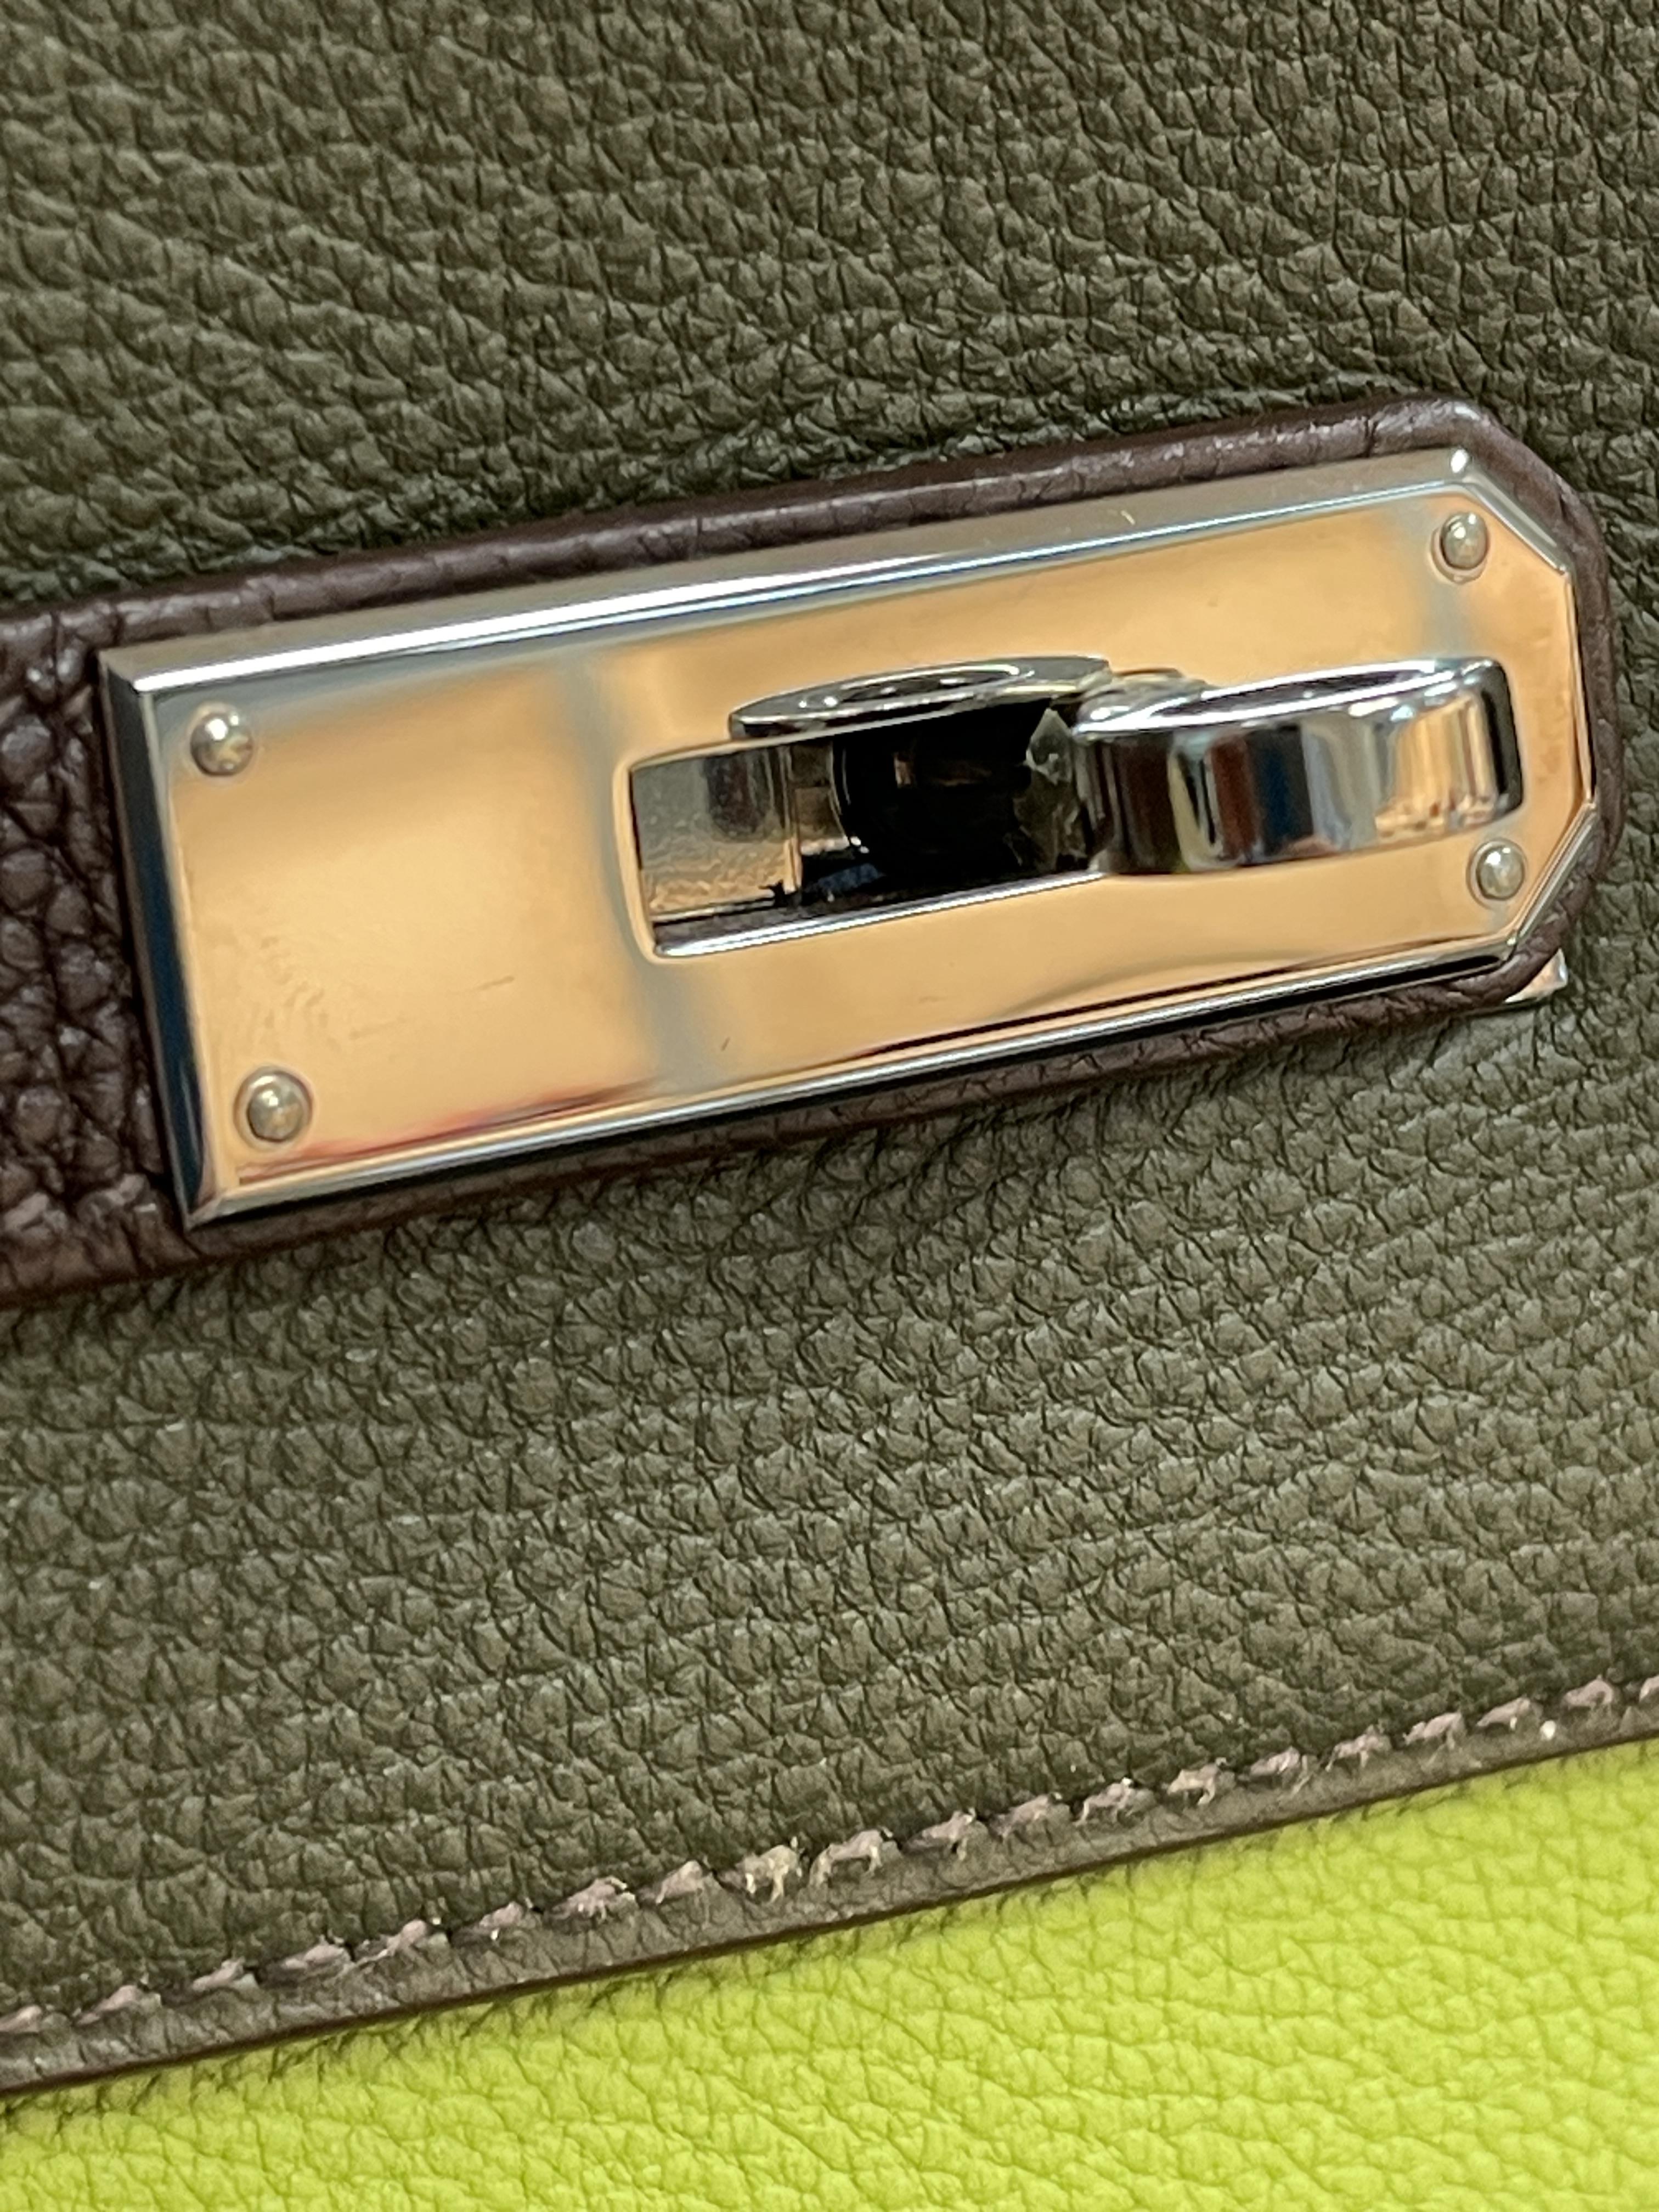 AN HERMÈS TRICOLOR KELLY 32 - Image 20 of 28